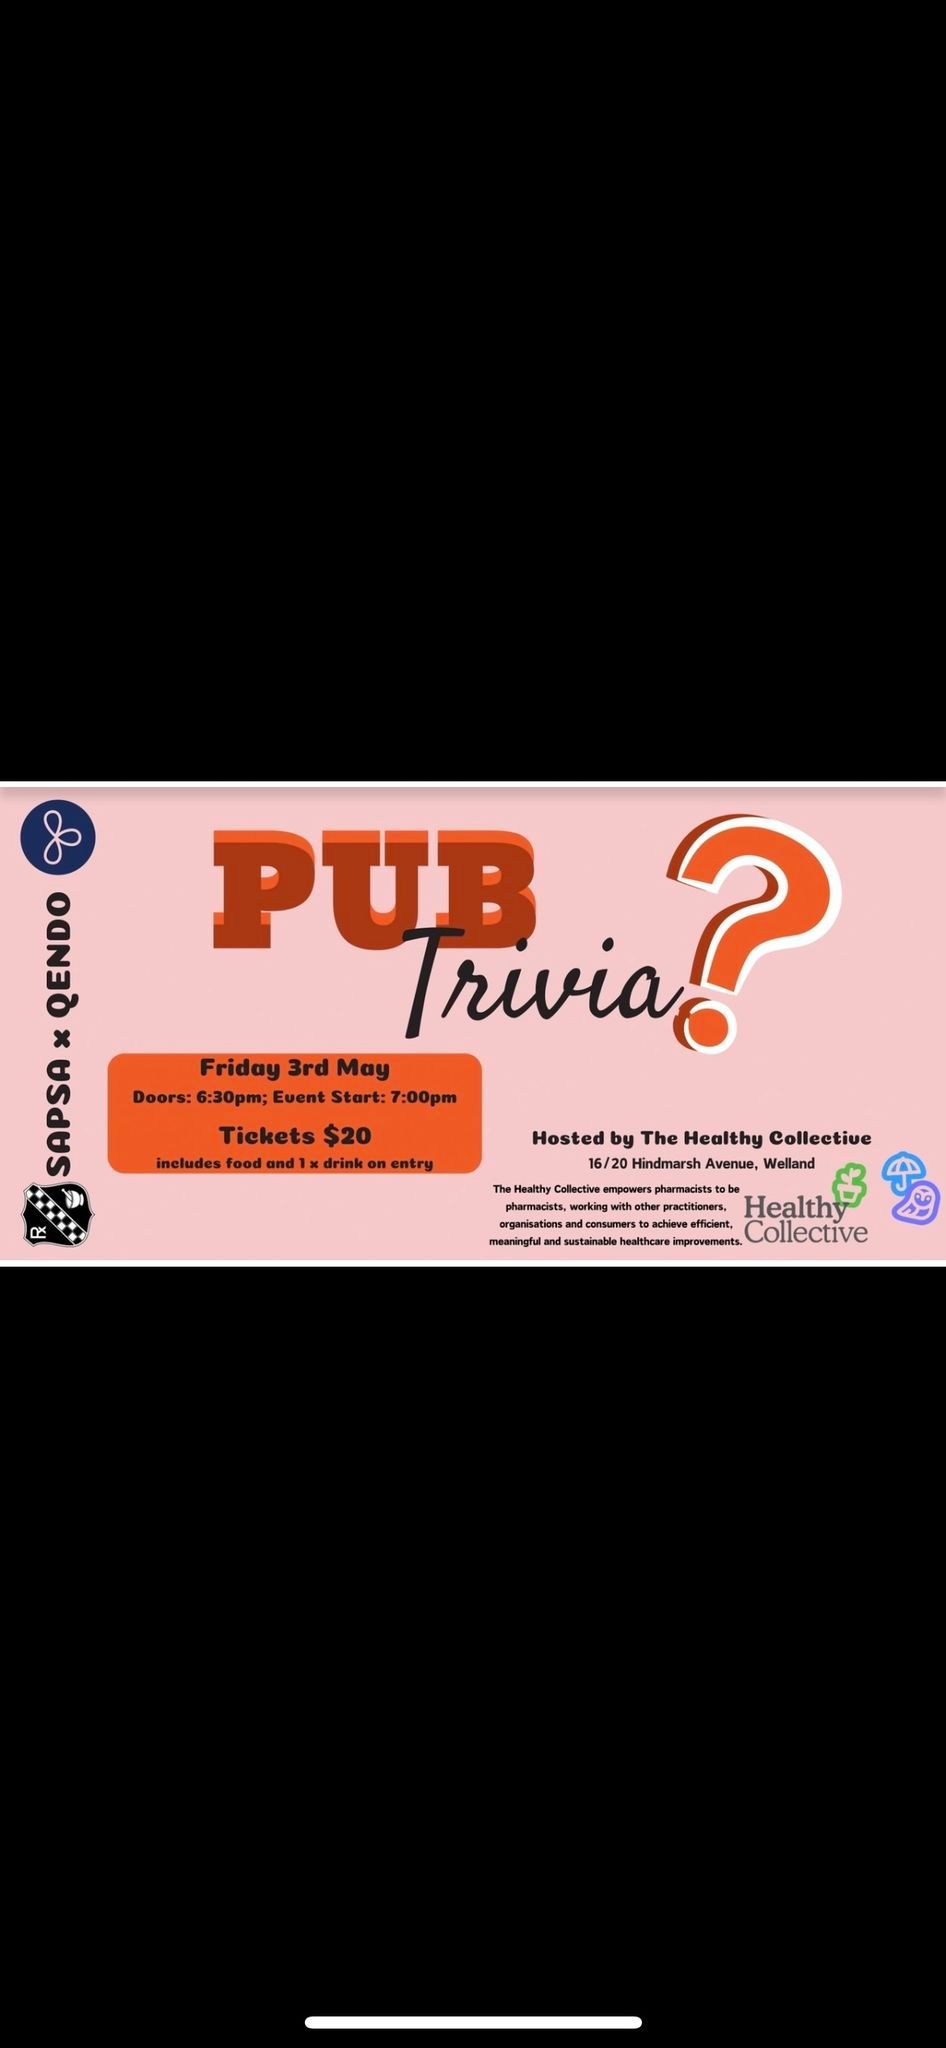 Pub Trivia \ud83c\udf7b (in collaboration with The Healthy Collective)